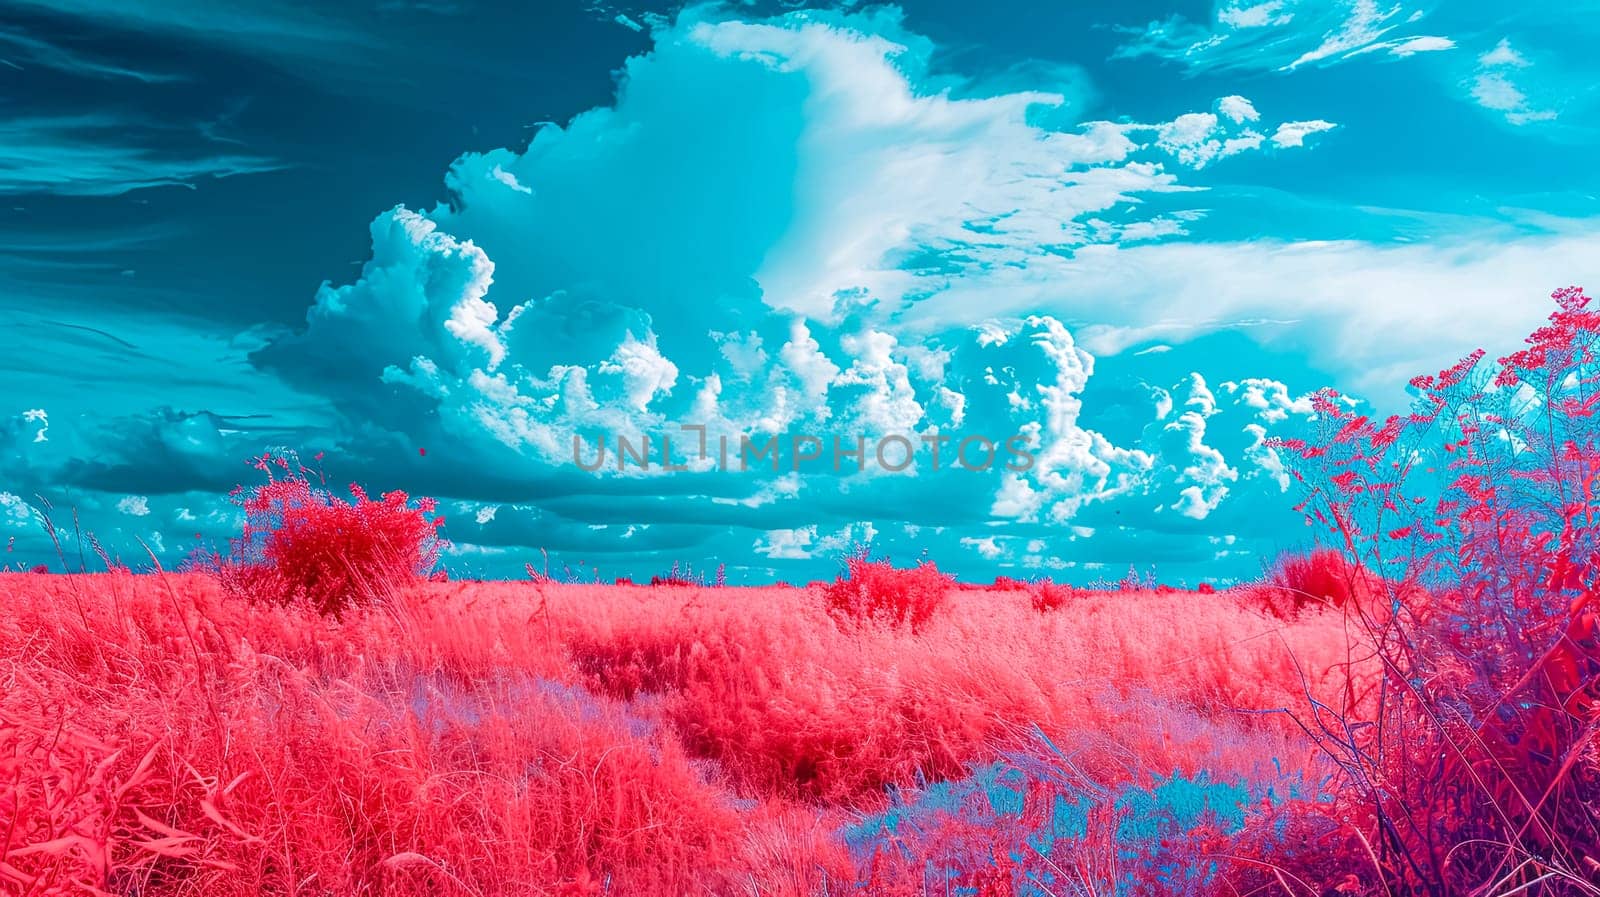 Infrared landscape with radiant red foliage under a surreal cyan sky with fluffy clouds